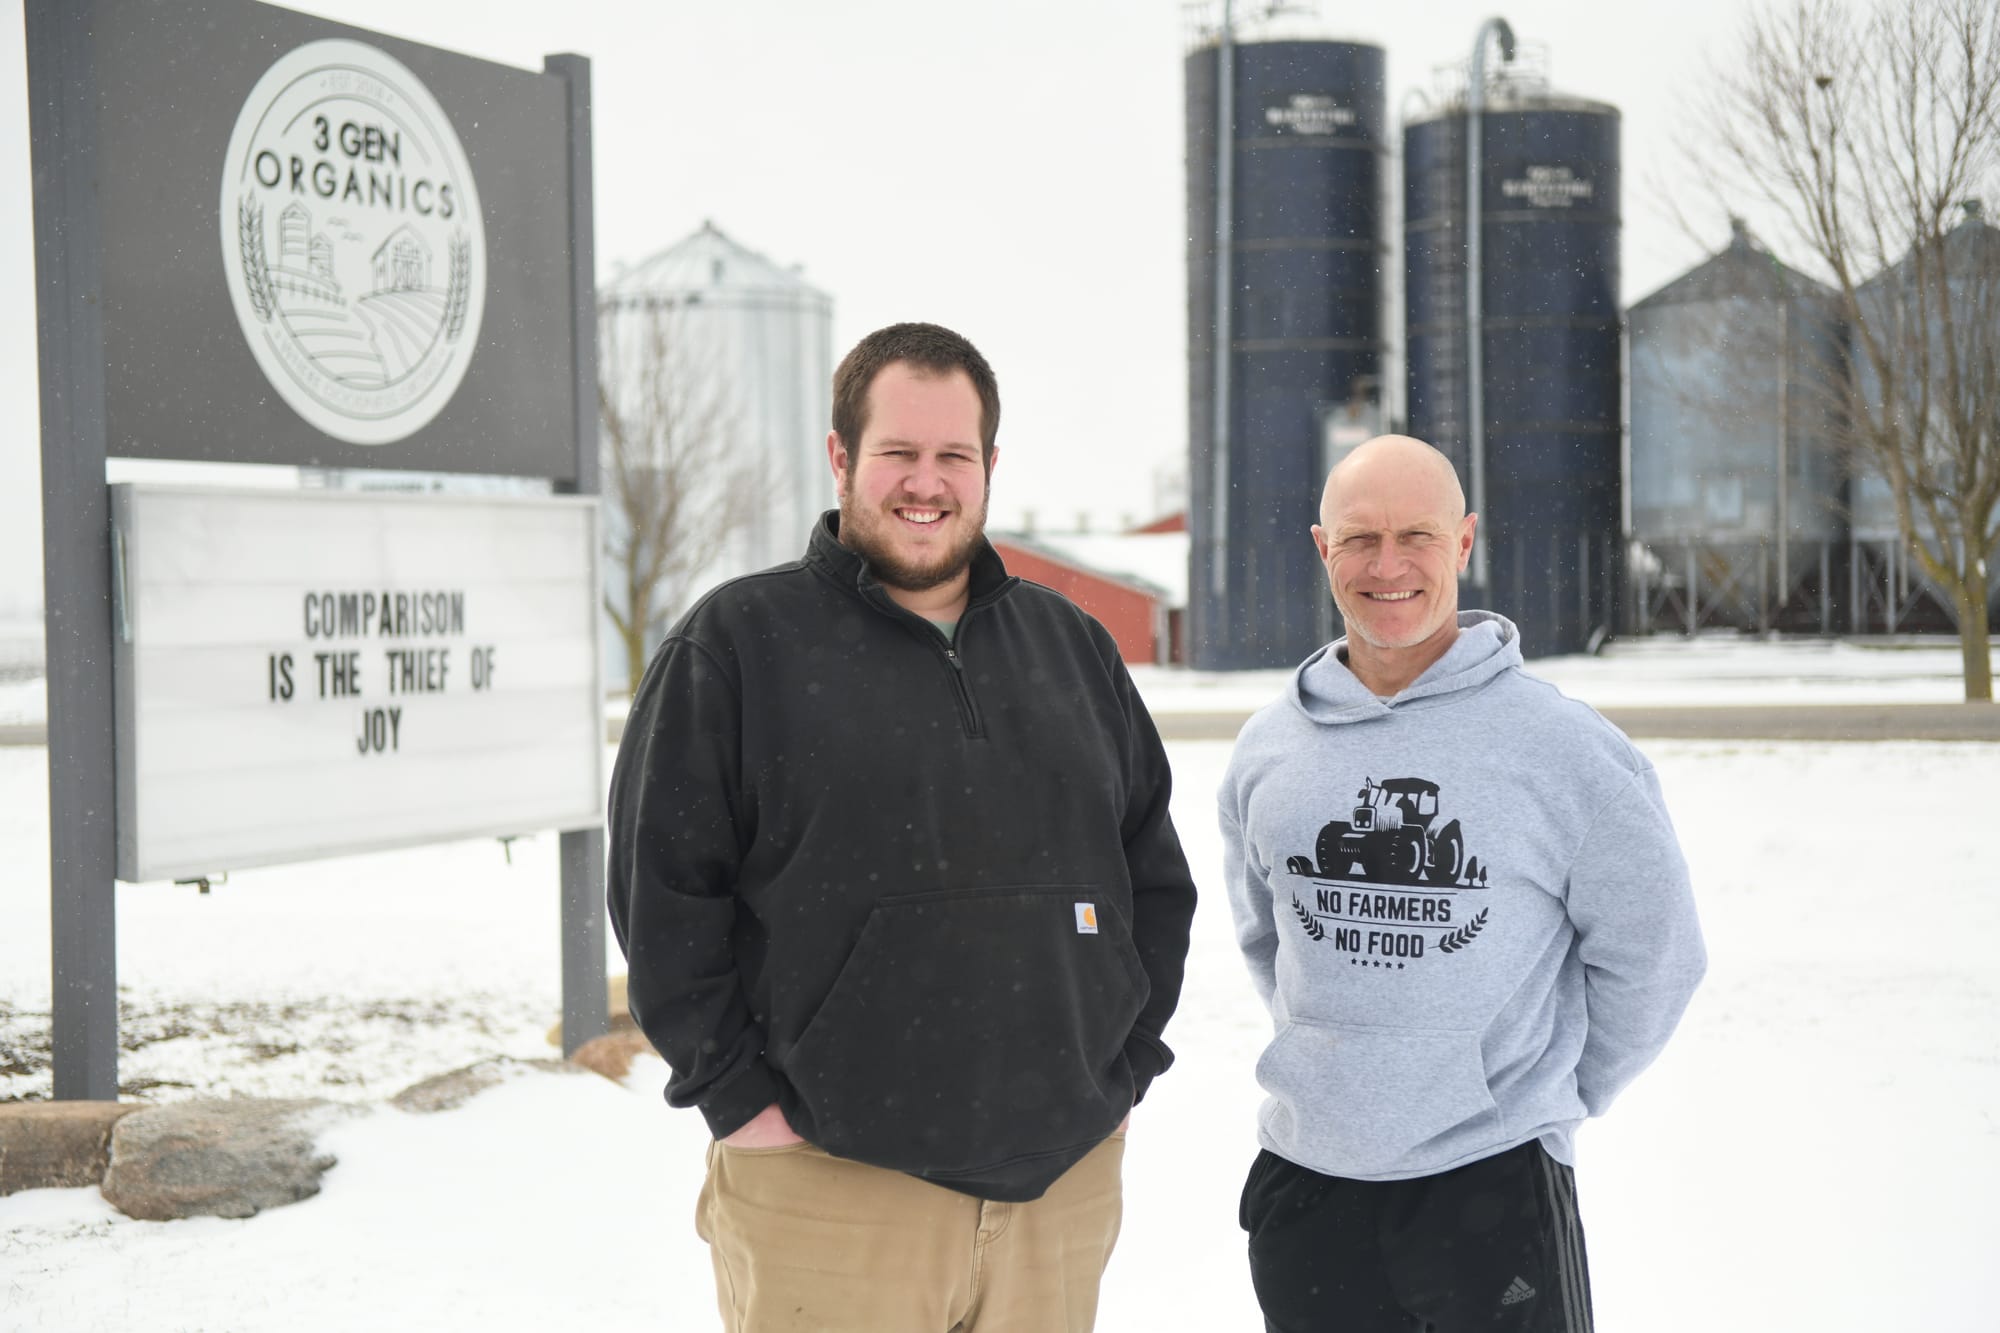 Wallenstein organic producer finds itself in the spotlight